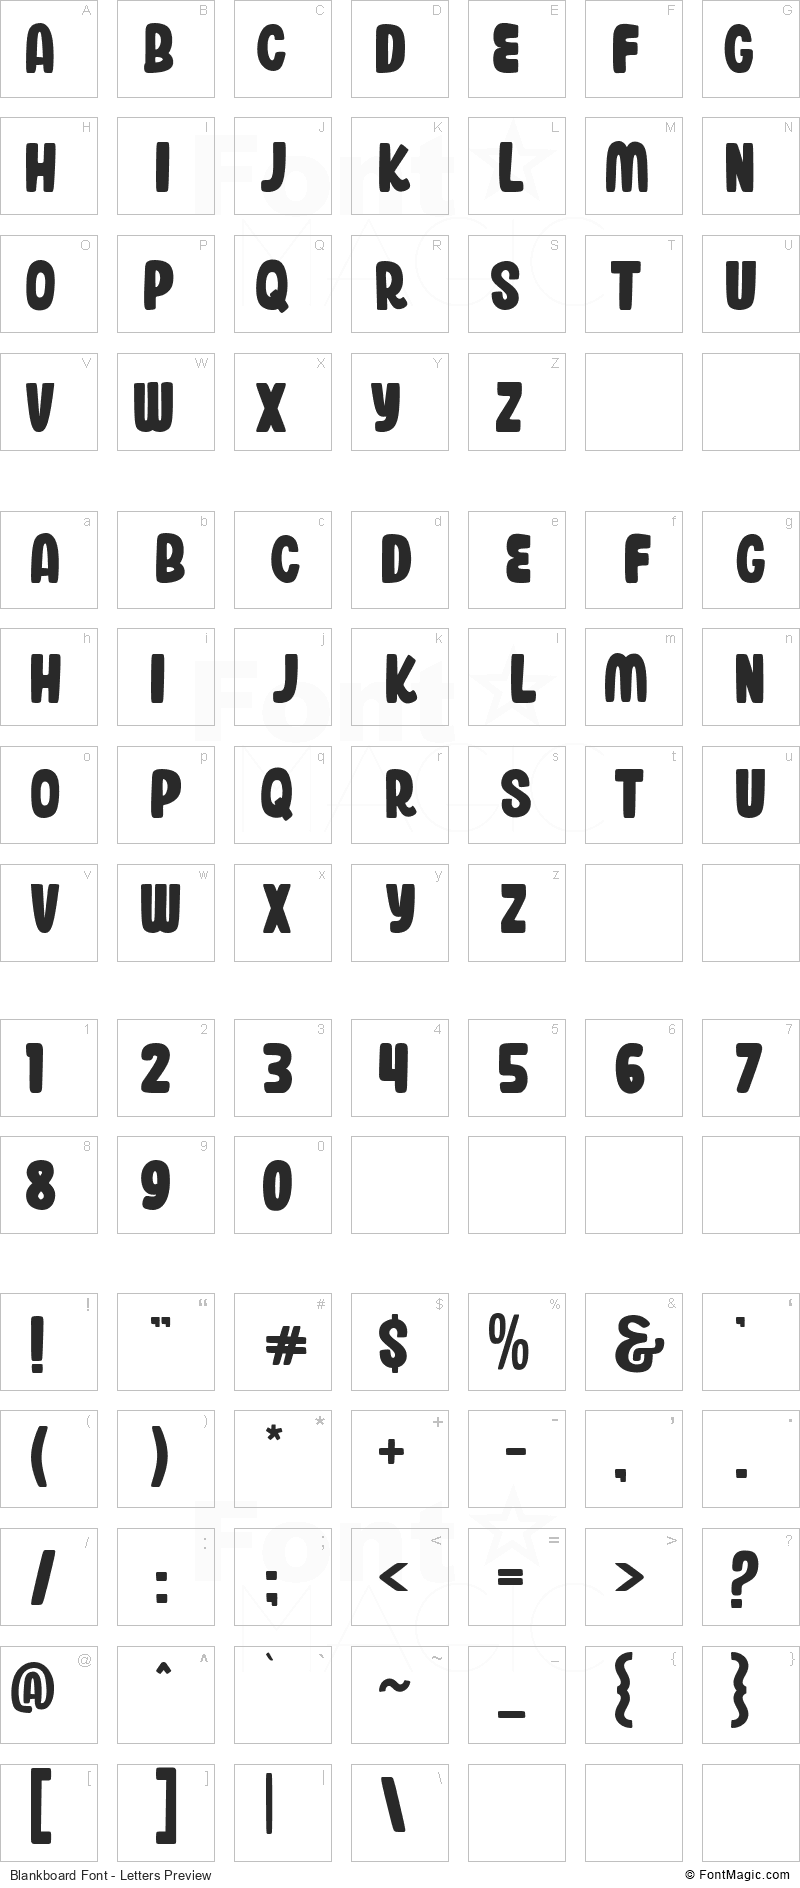 Blankboard Font - All Latters Preview Chart